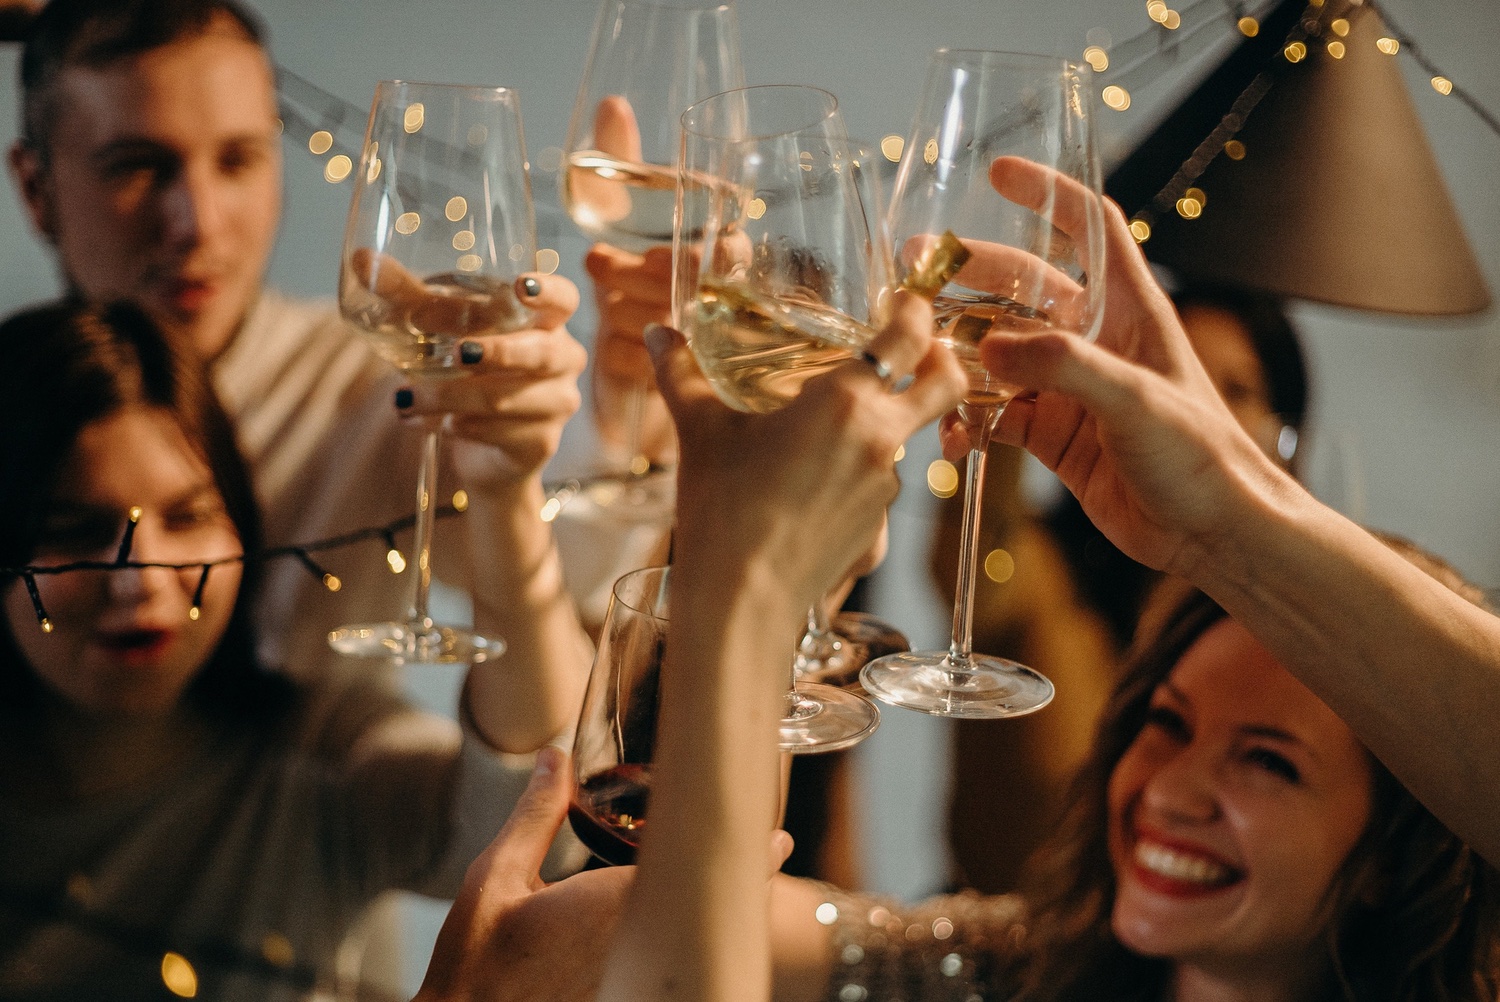 How to drink safely with diabetes on New Year’s Eve